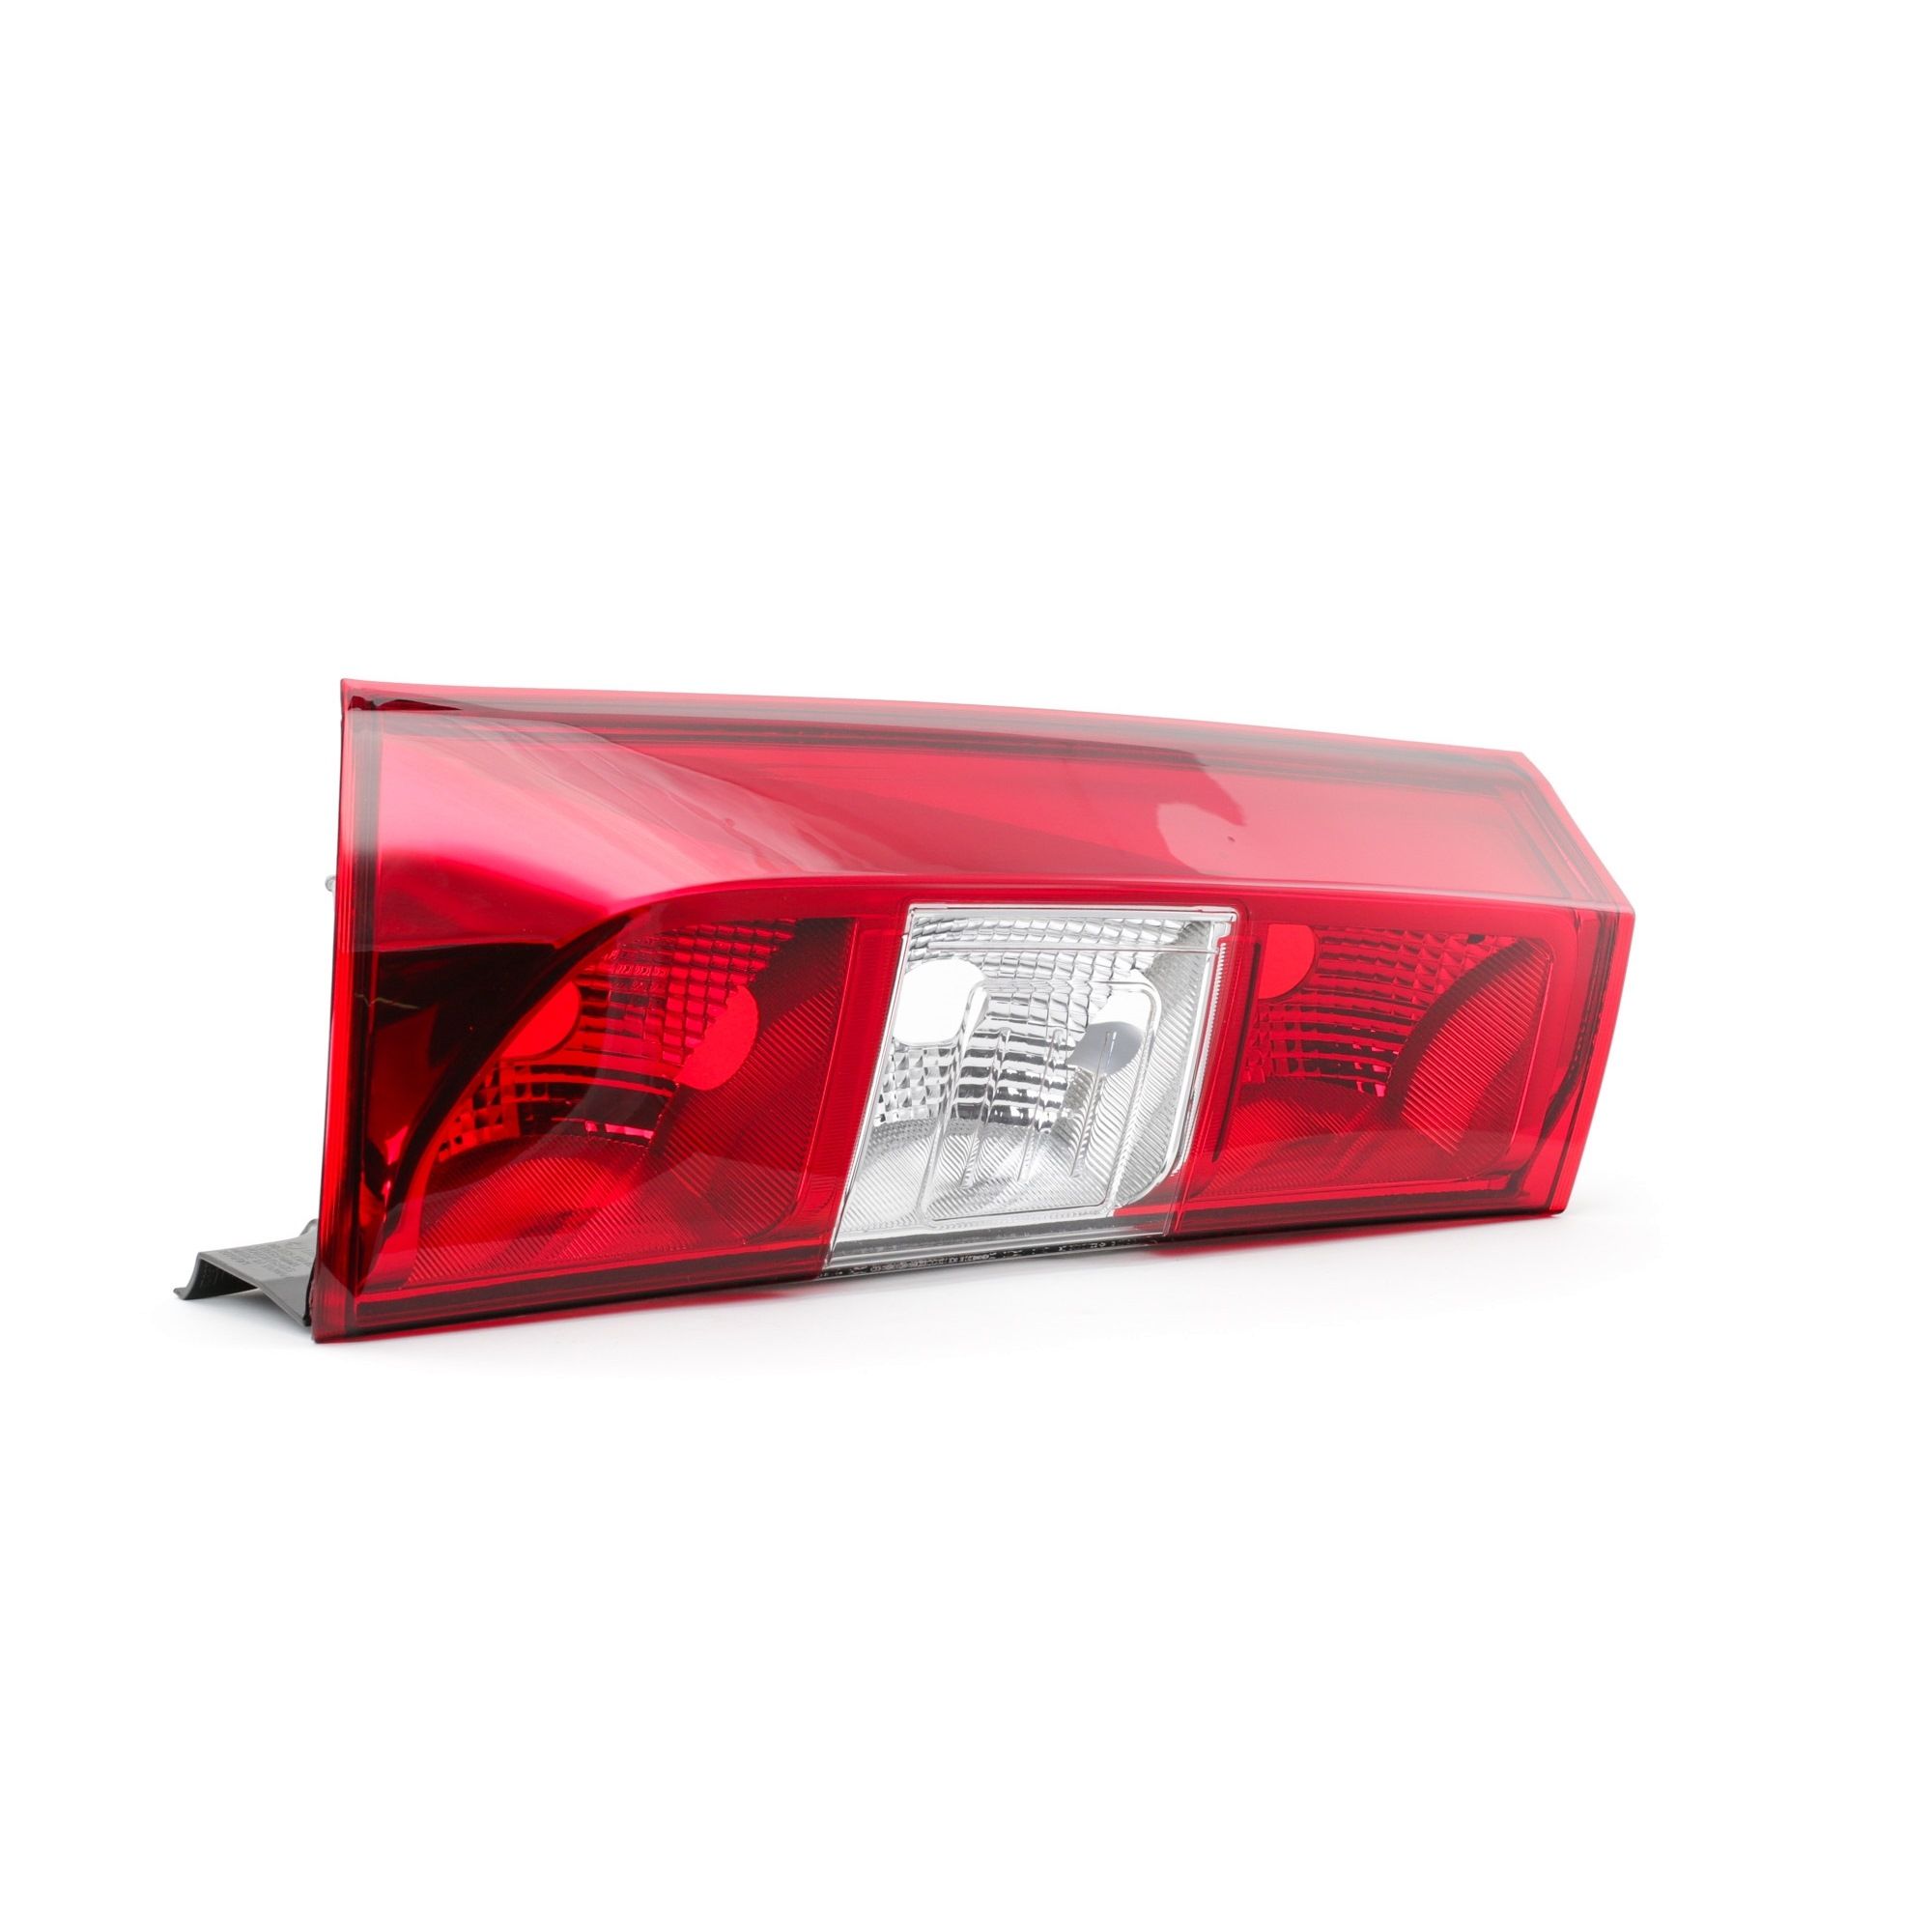 ABAKUS 551-19A4L-LD-UE Rear light DACIA experience and price